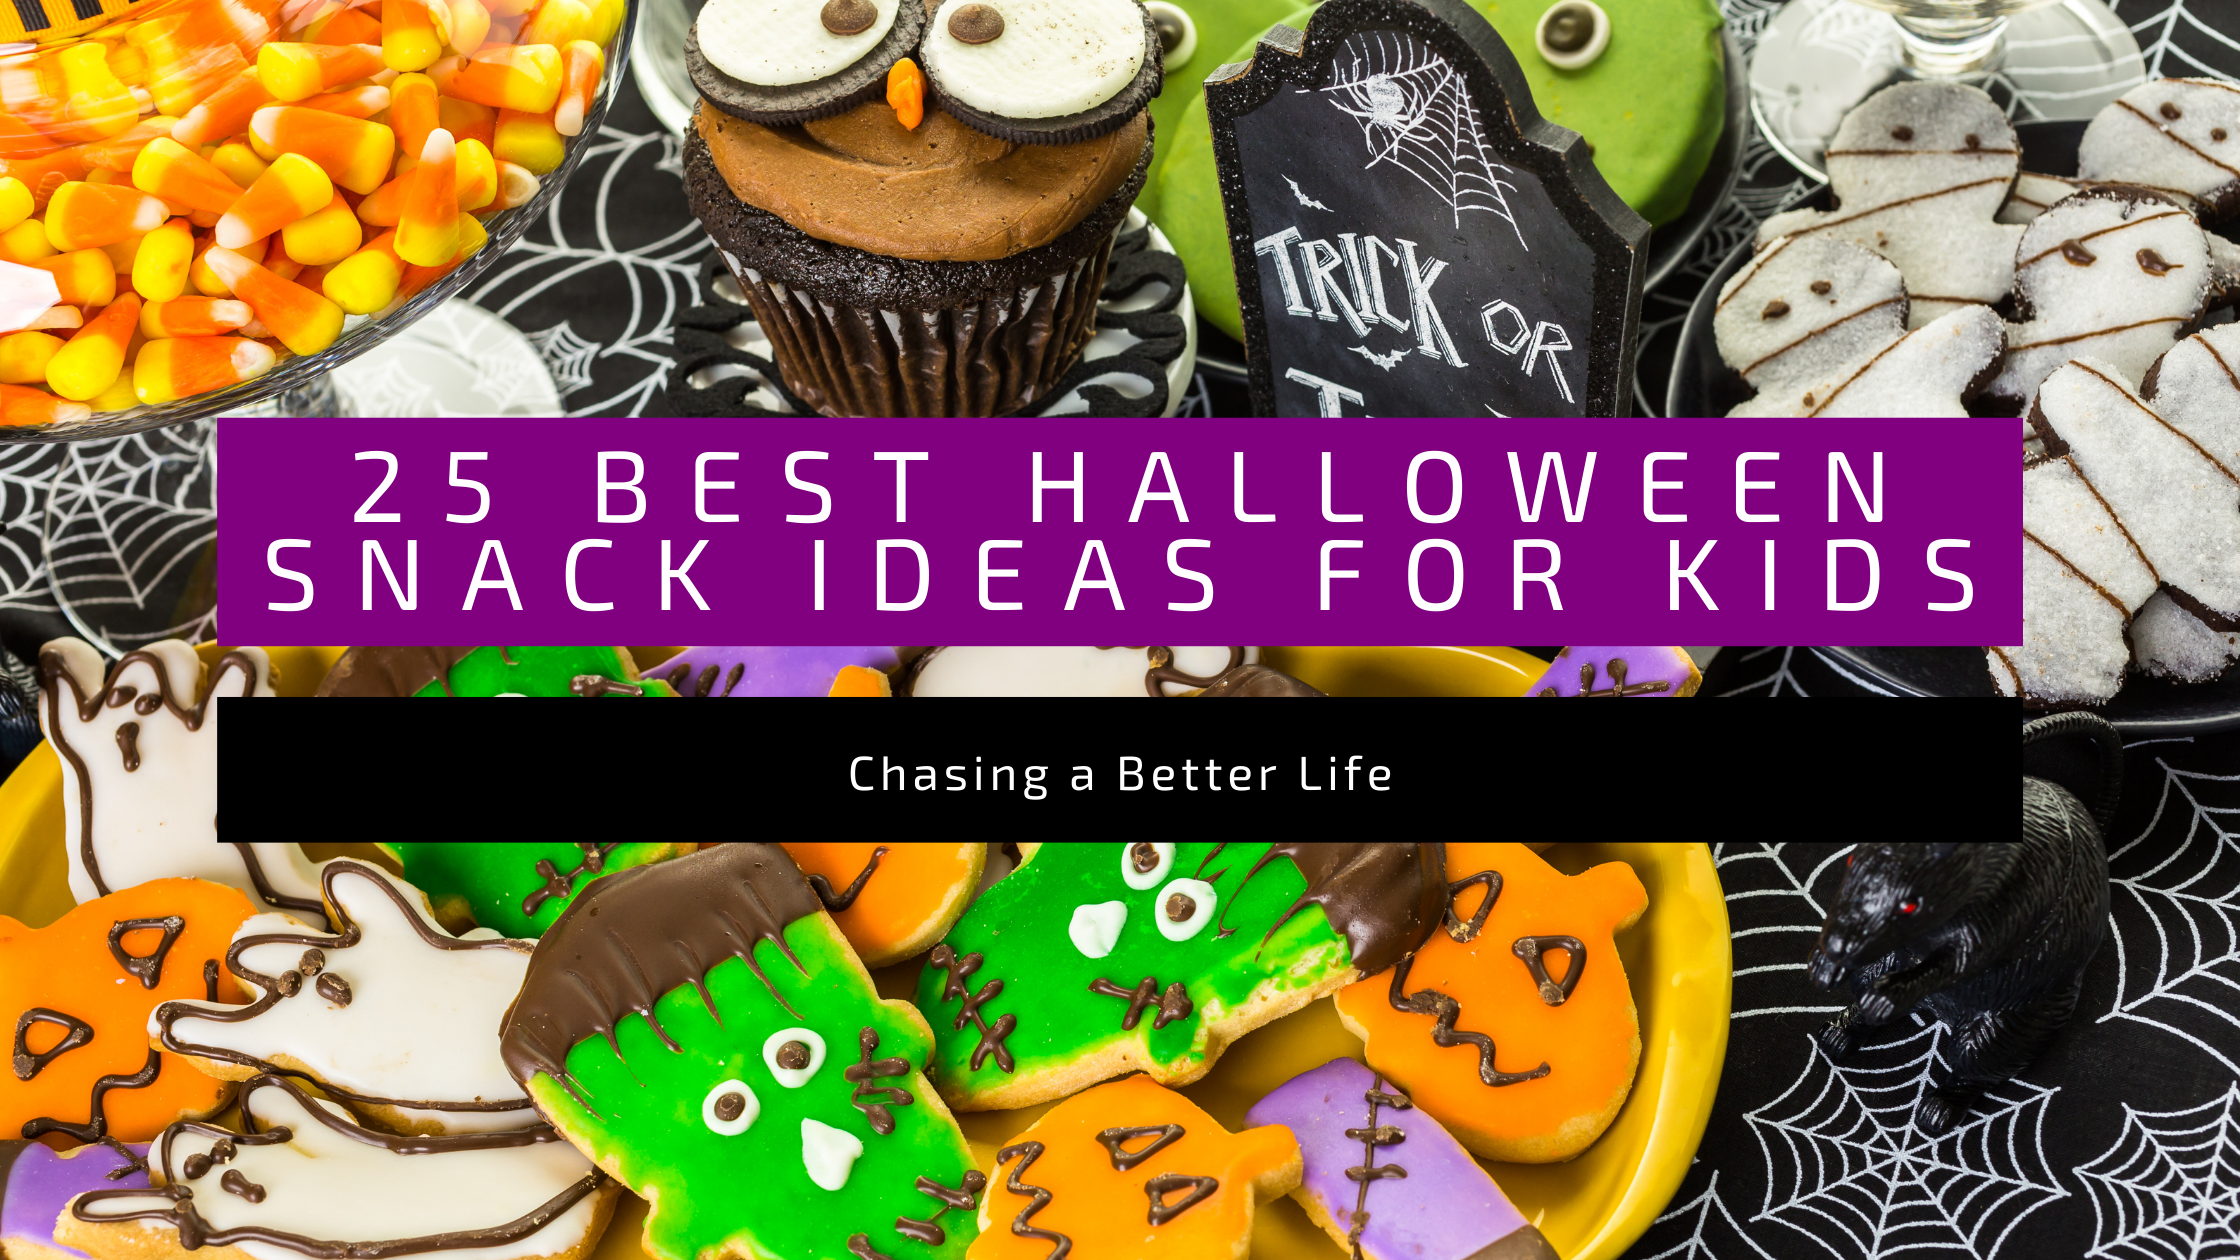 The 25 Best Halloween Snack Ideas for Kids 13